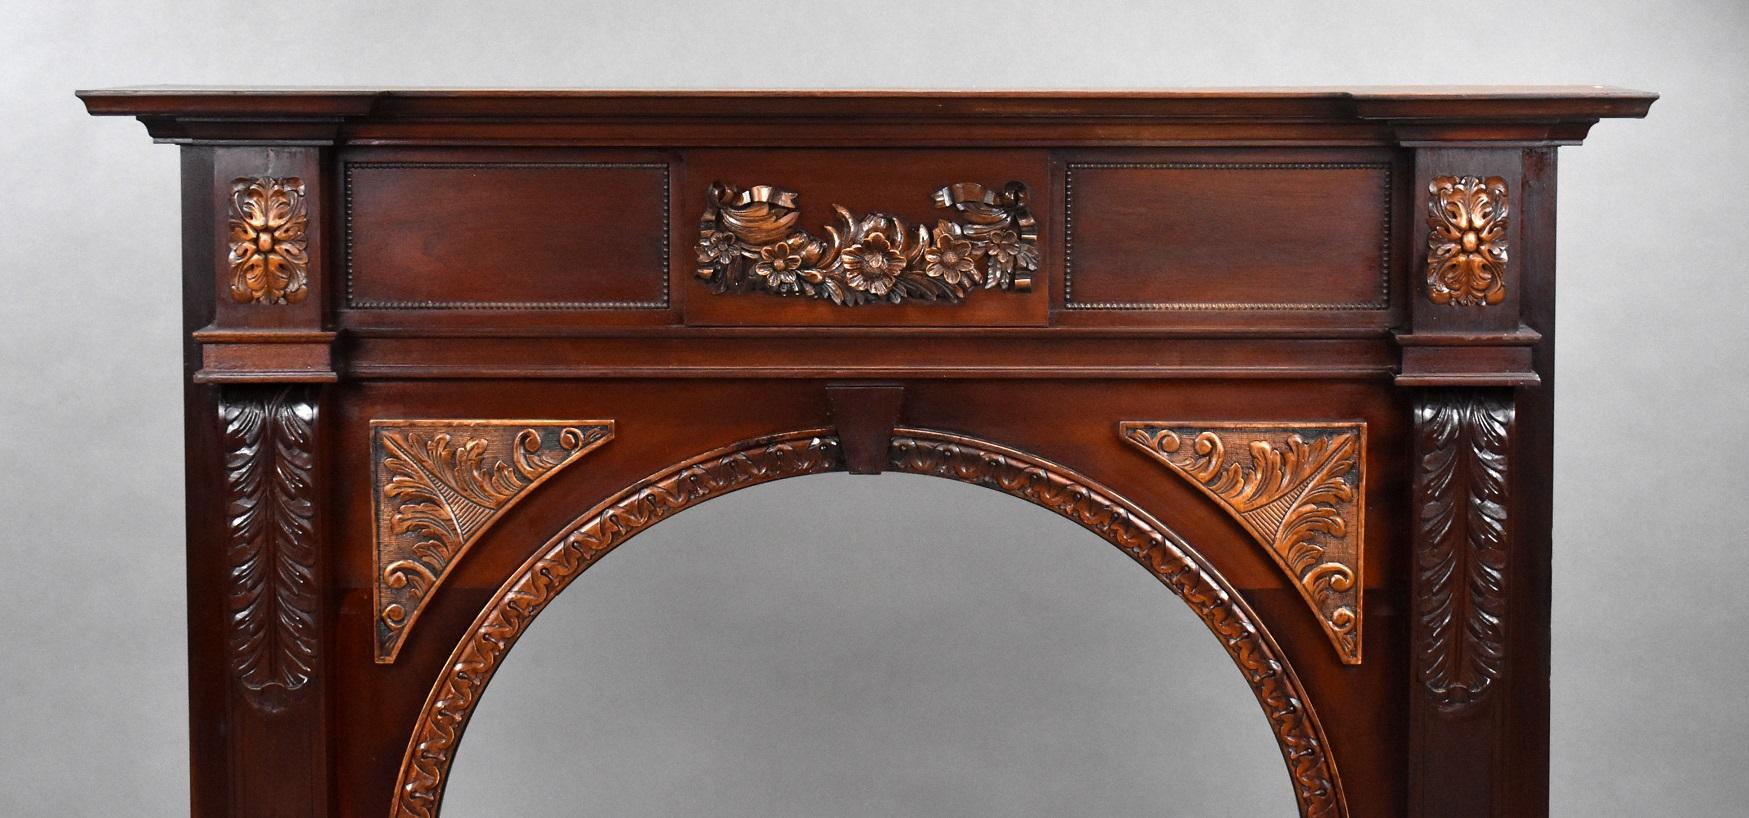 Offered for sale is this 1930s mahogany carved fire surround in good condition with carved flowers to the centre and carved motifs to each column, with a decorative arch.